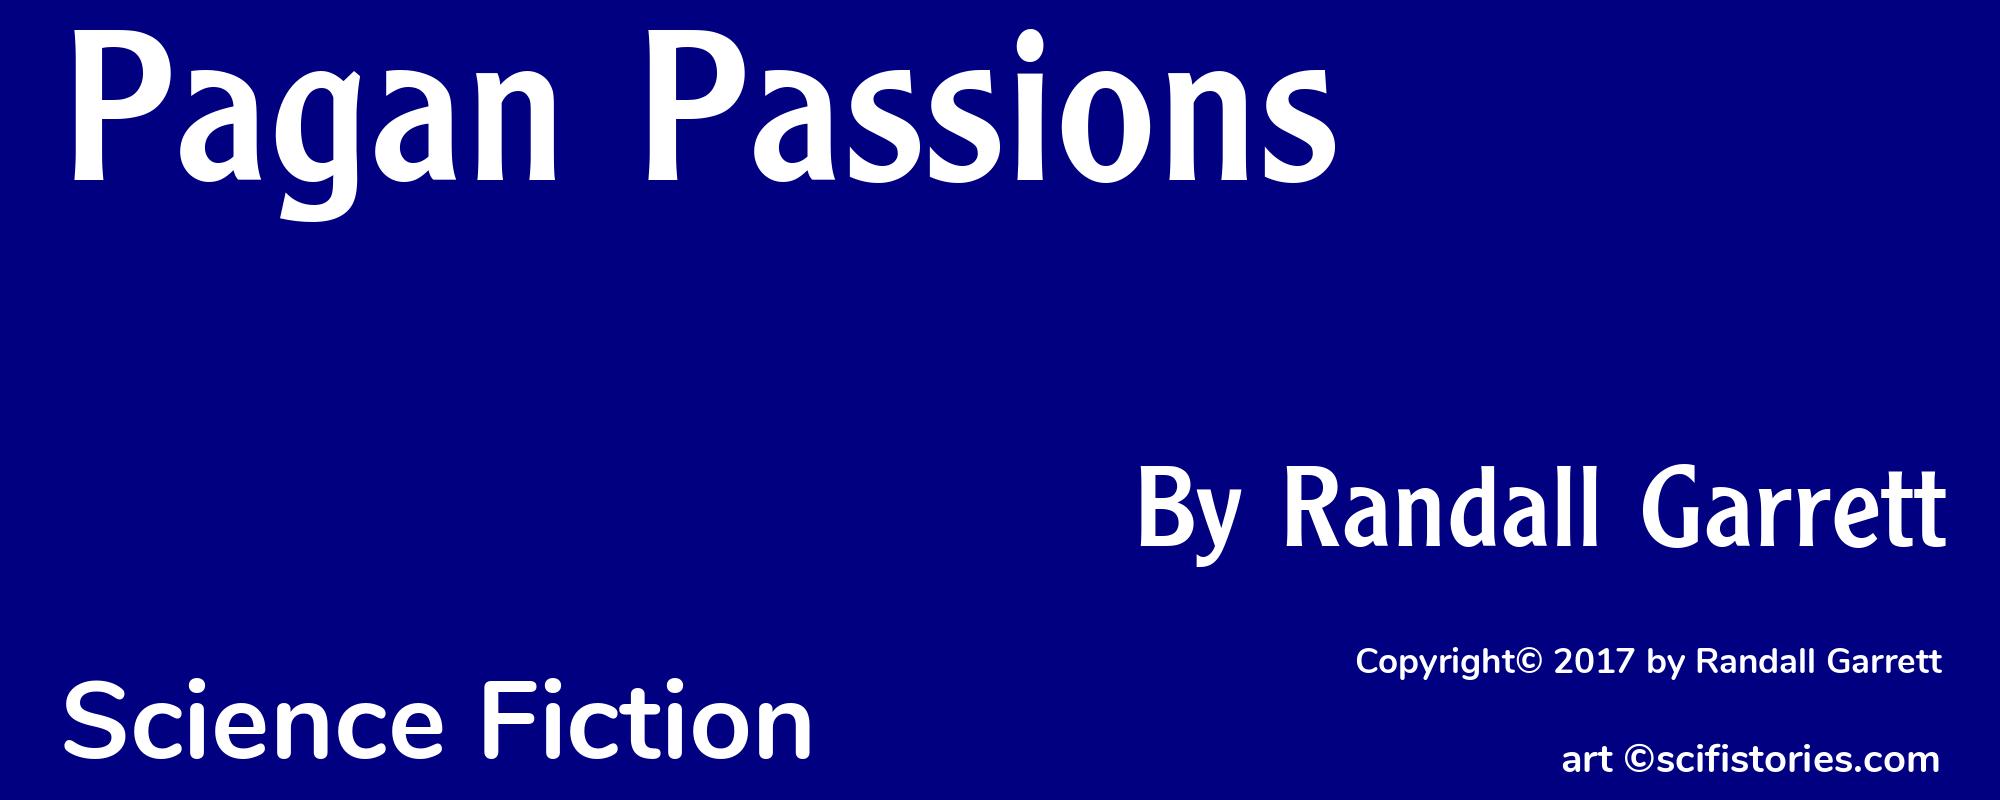 Pagan Passions - Cover